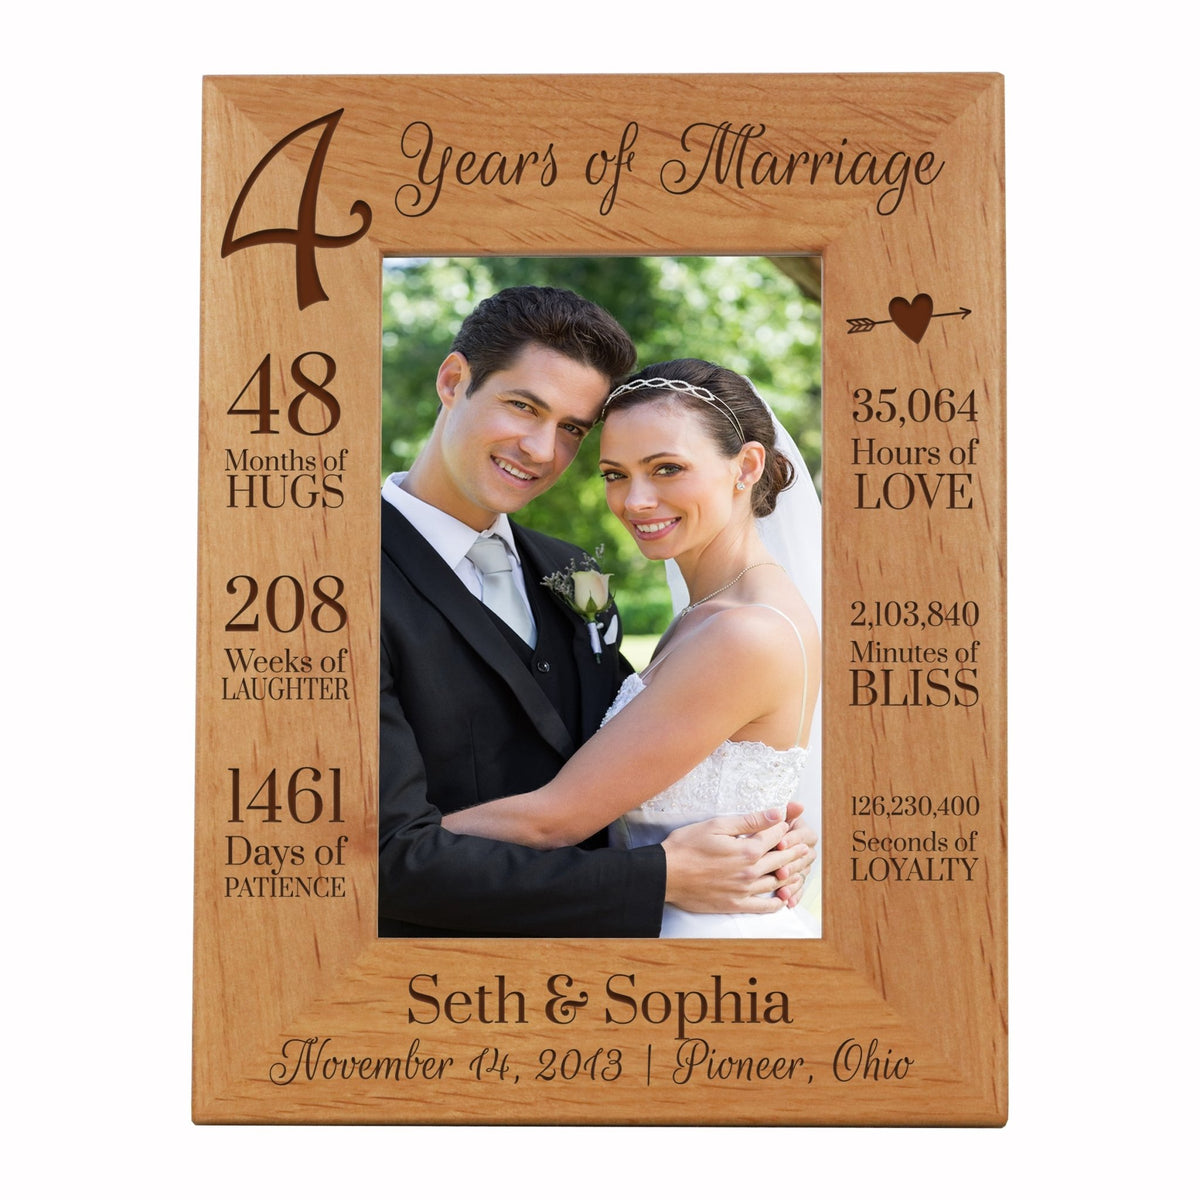 Lifesong Milestones Personalized Engraved 4th Anniversary Photo Frame Gift for Couples